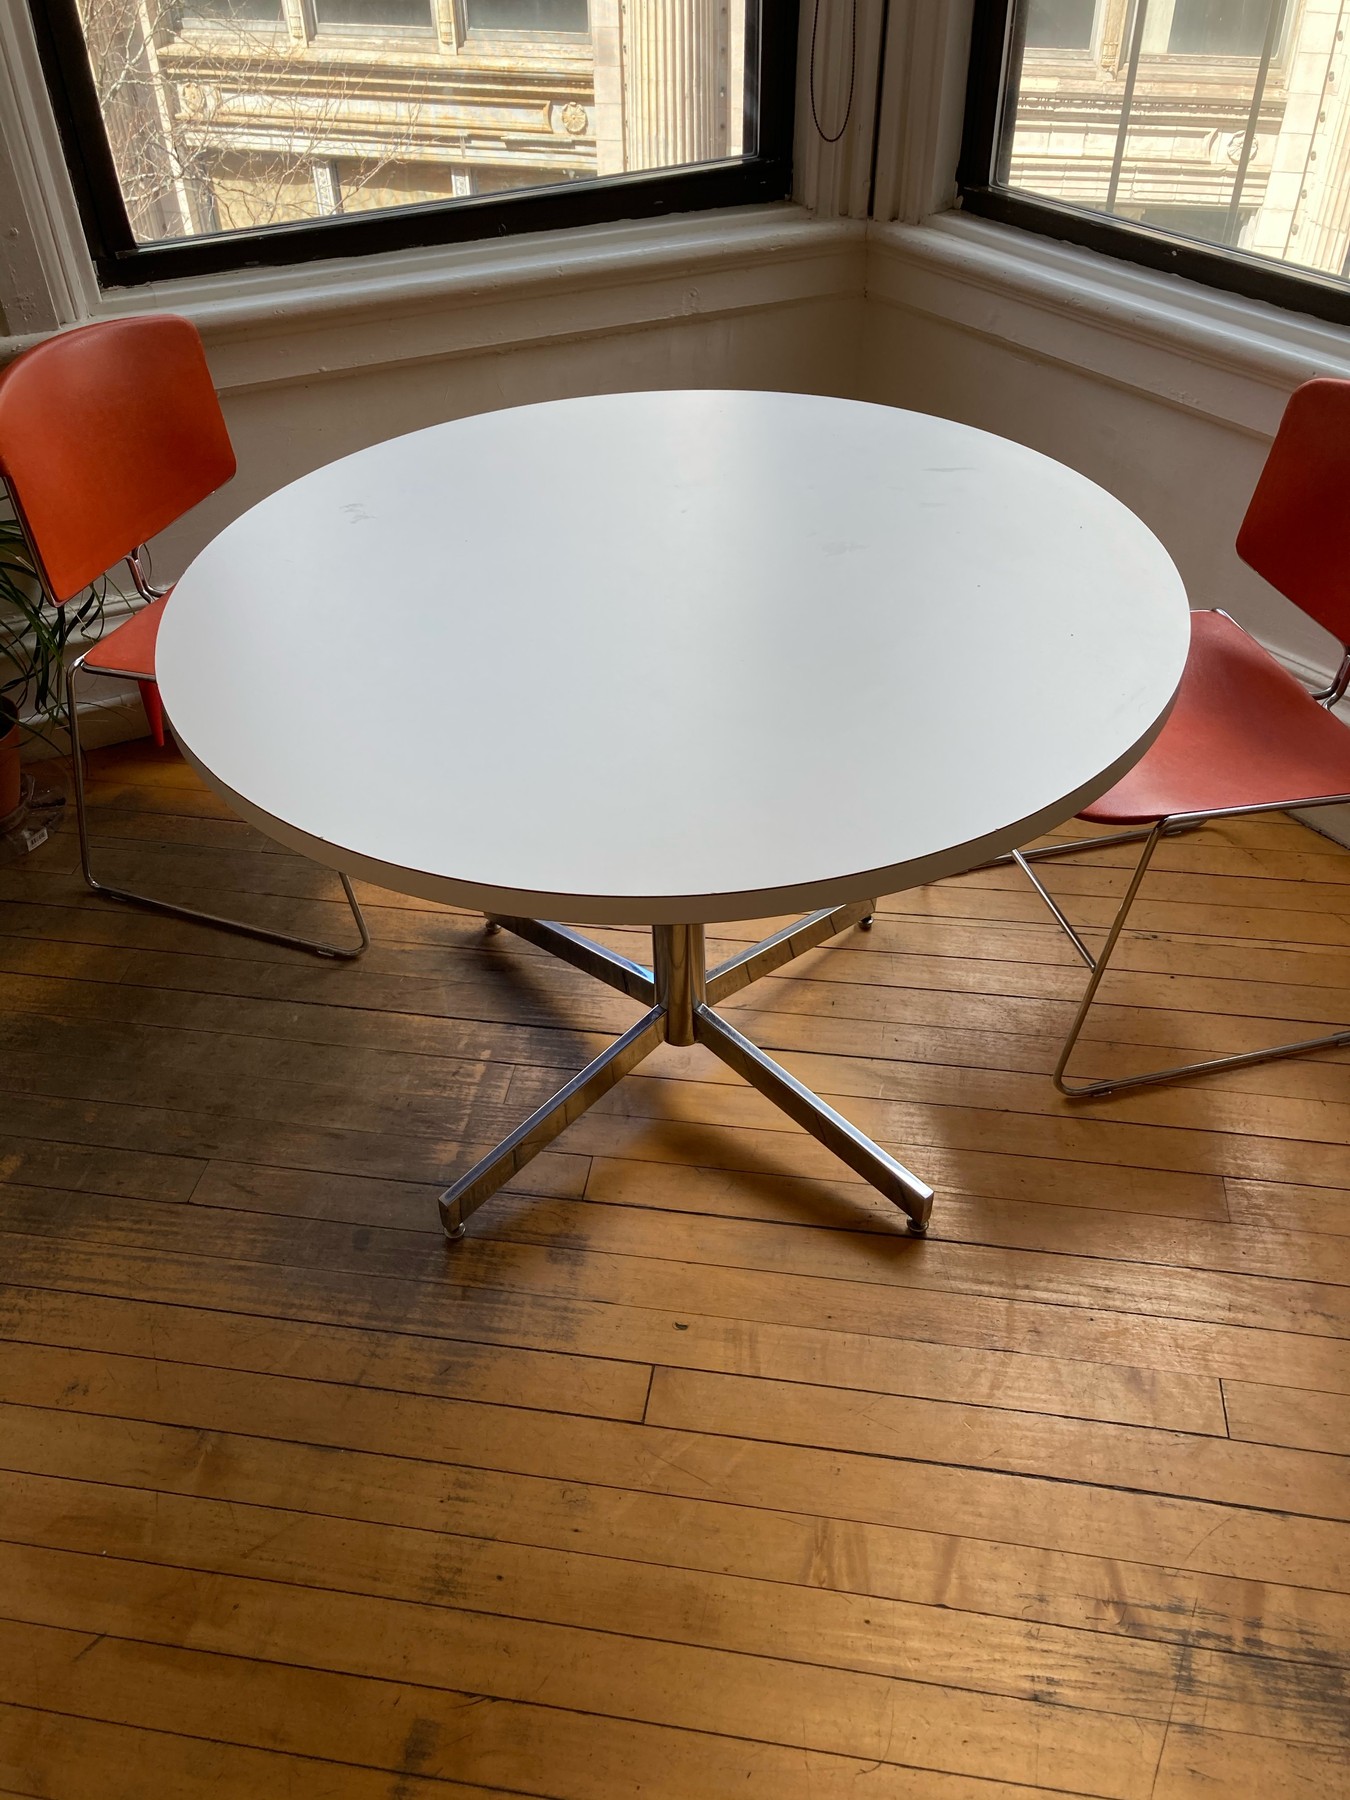 42" round table